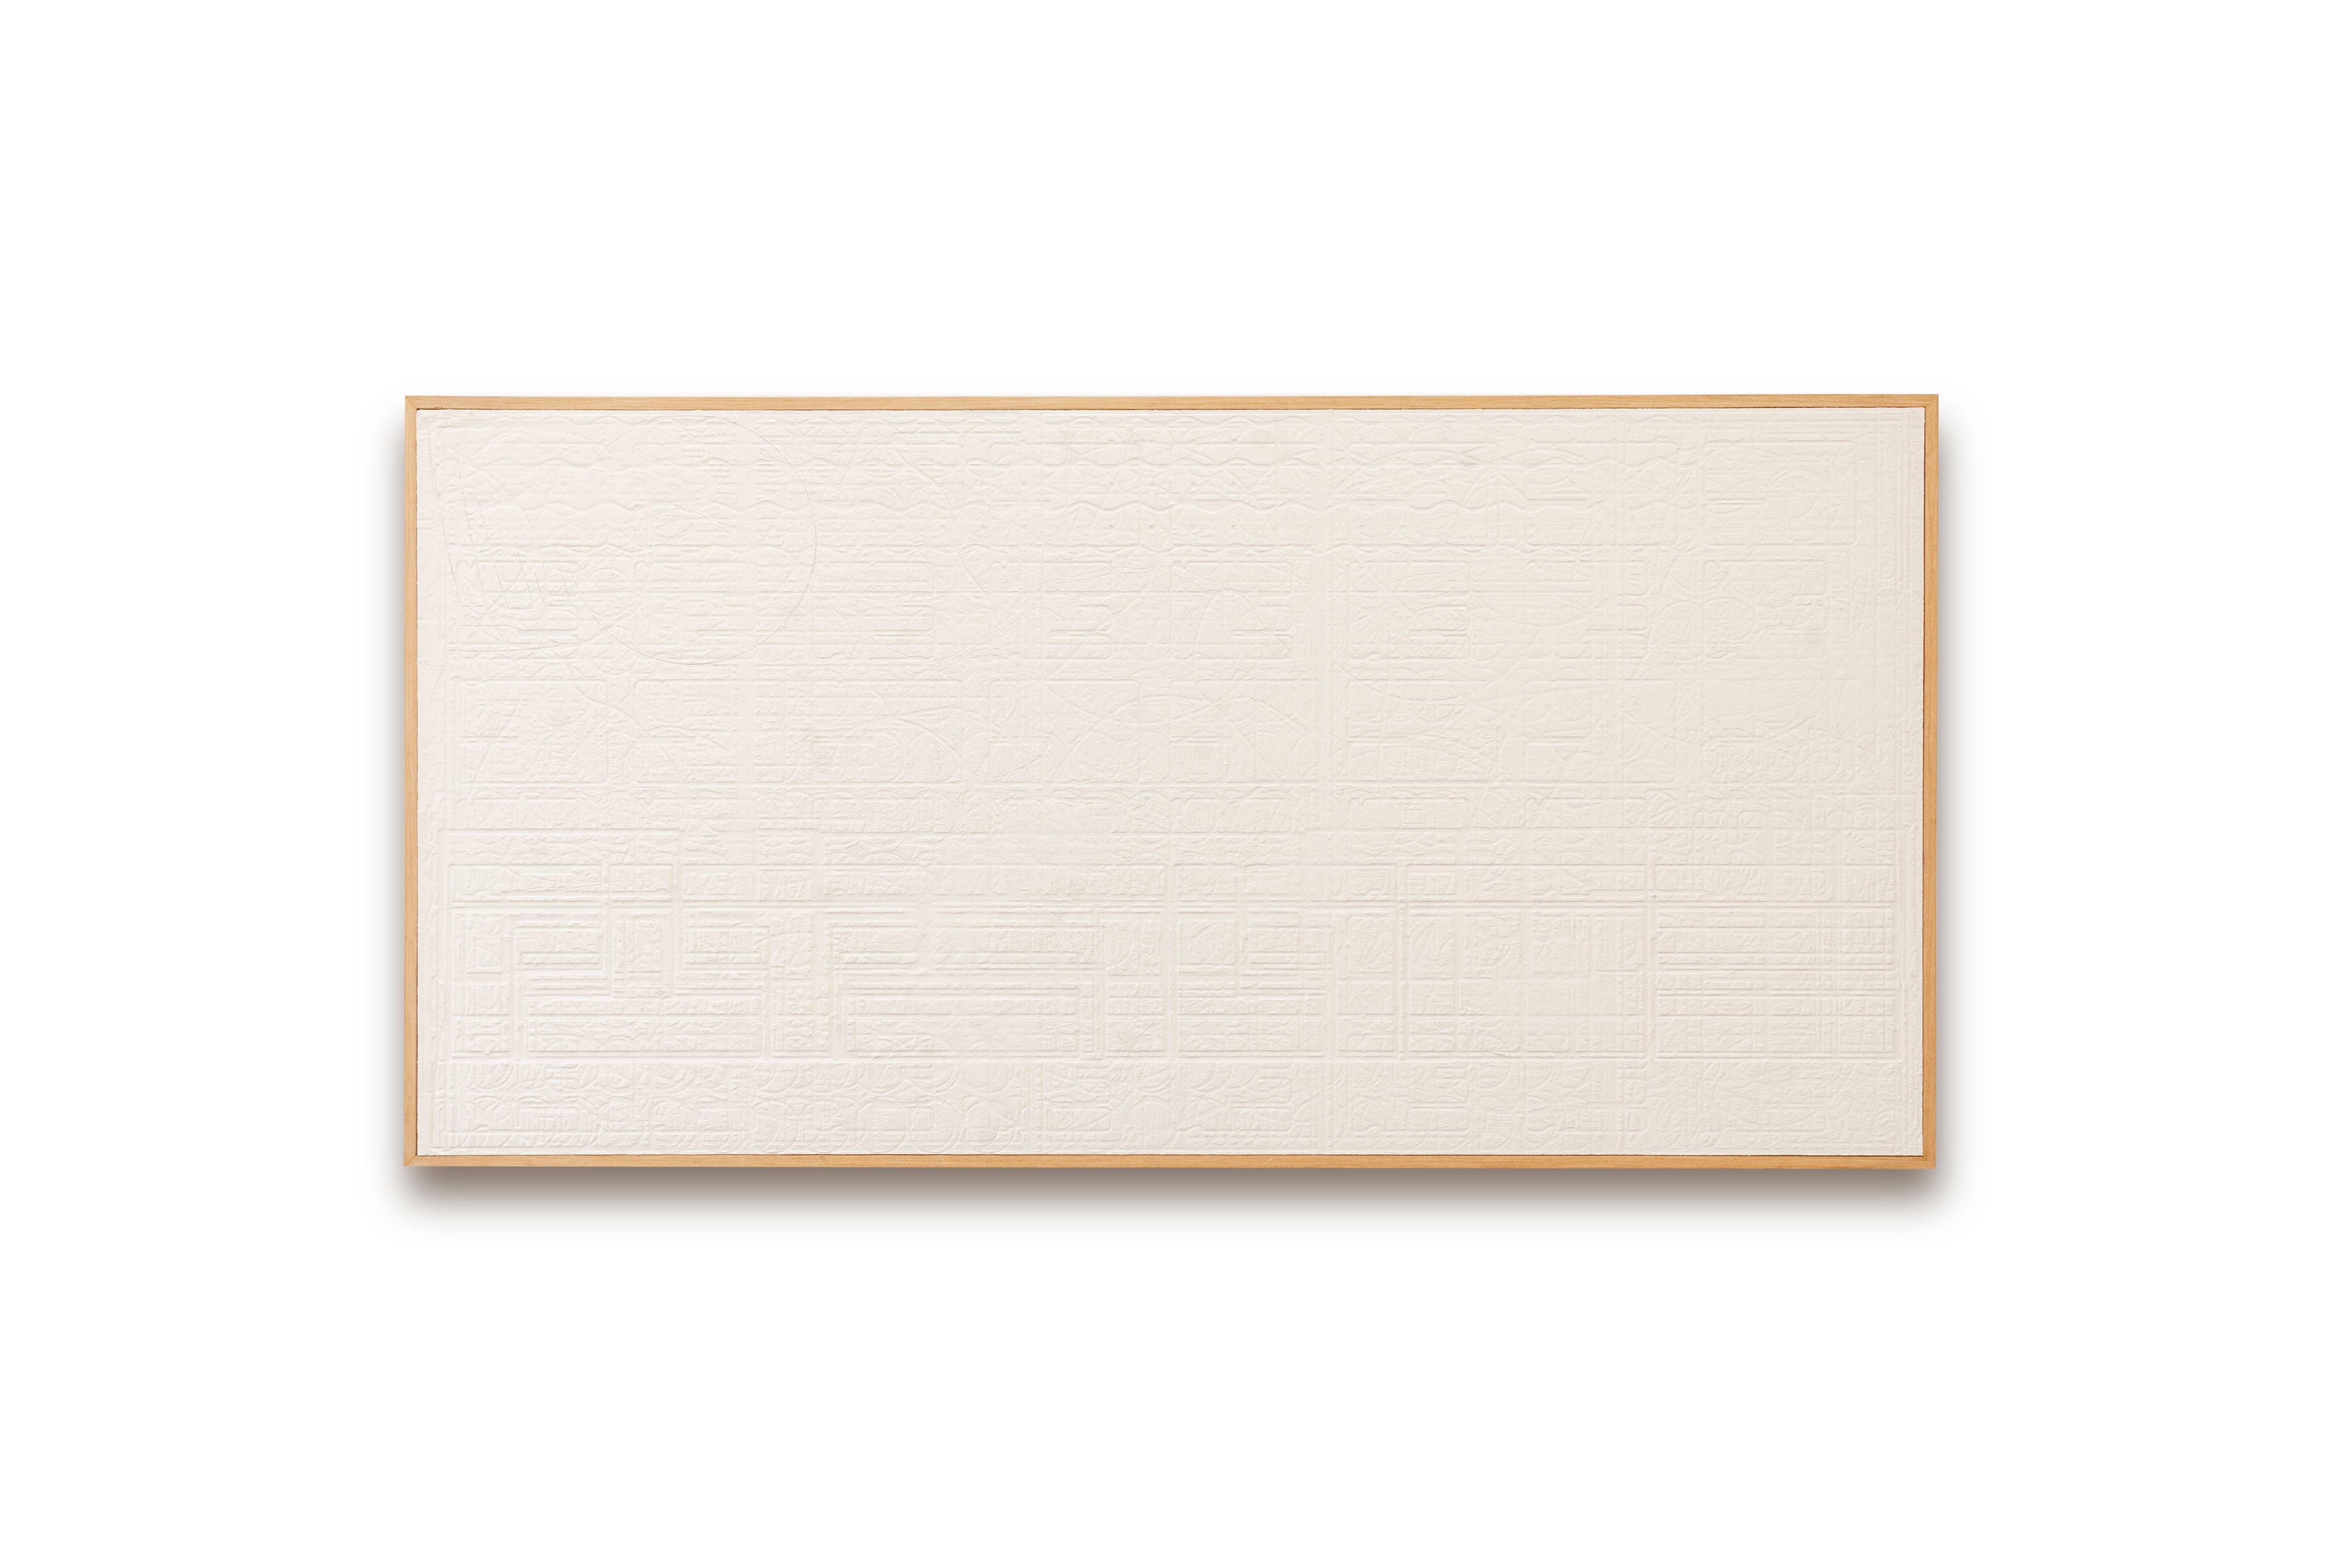 Arozarena De La Fuente Abstract Painting - Unique White Painting Ideal for Modern and Large Spaces 